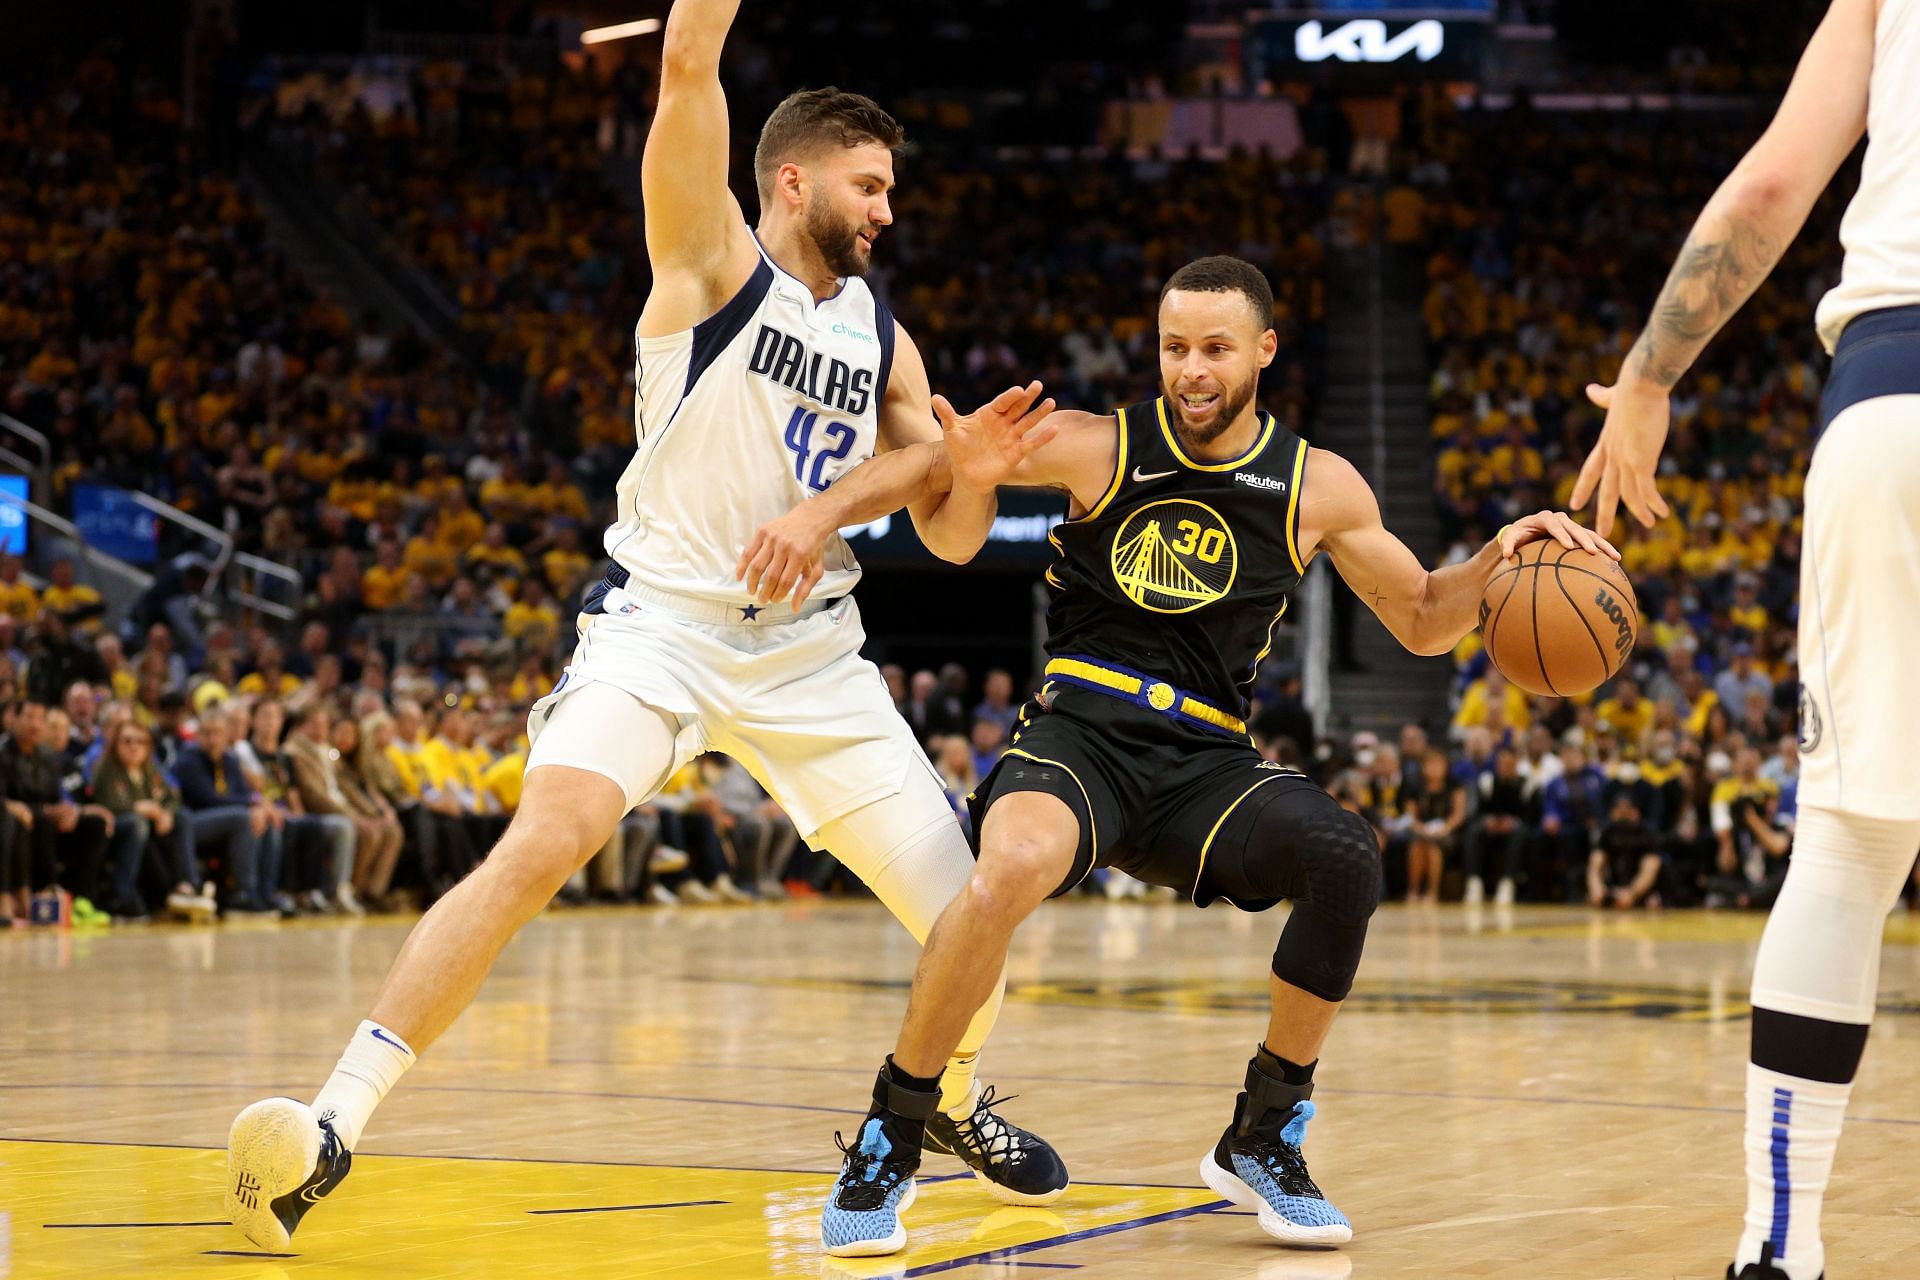 Steph Curry #30 of the Golden State Warriors drives against Maxi Kleber #42.